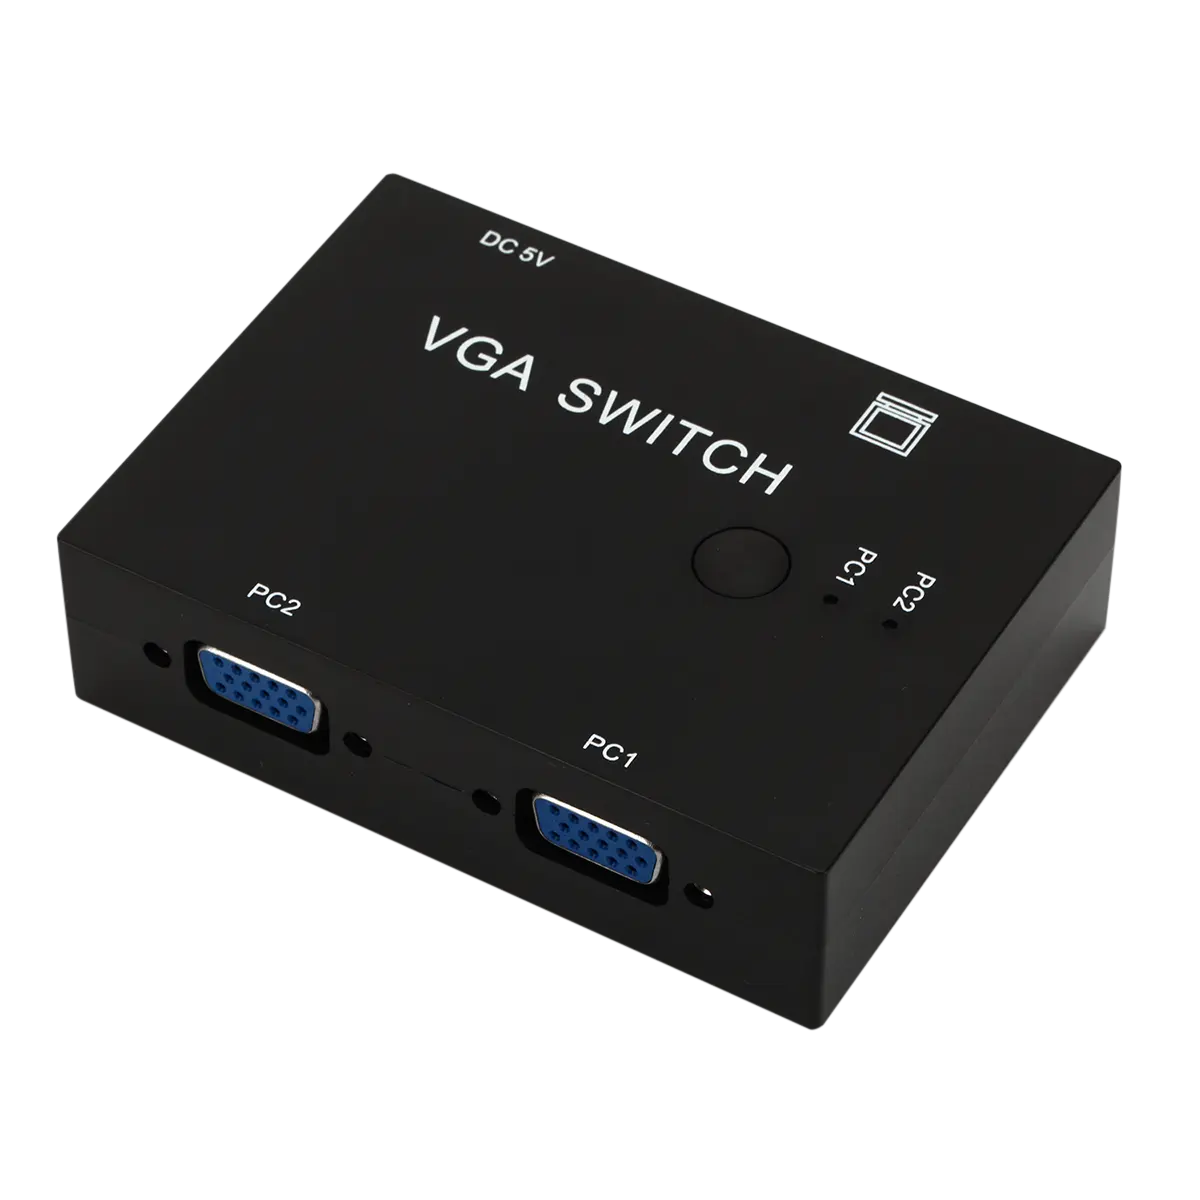 2 input 1 output VGA switch 2 in 1 out Plug and play Support VGA, XVGA, SVGA, UXGA and Multisync display Switch Adapter Splitter